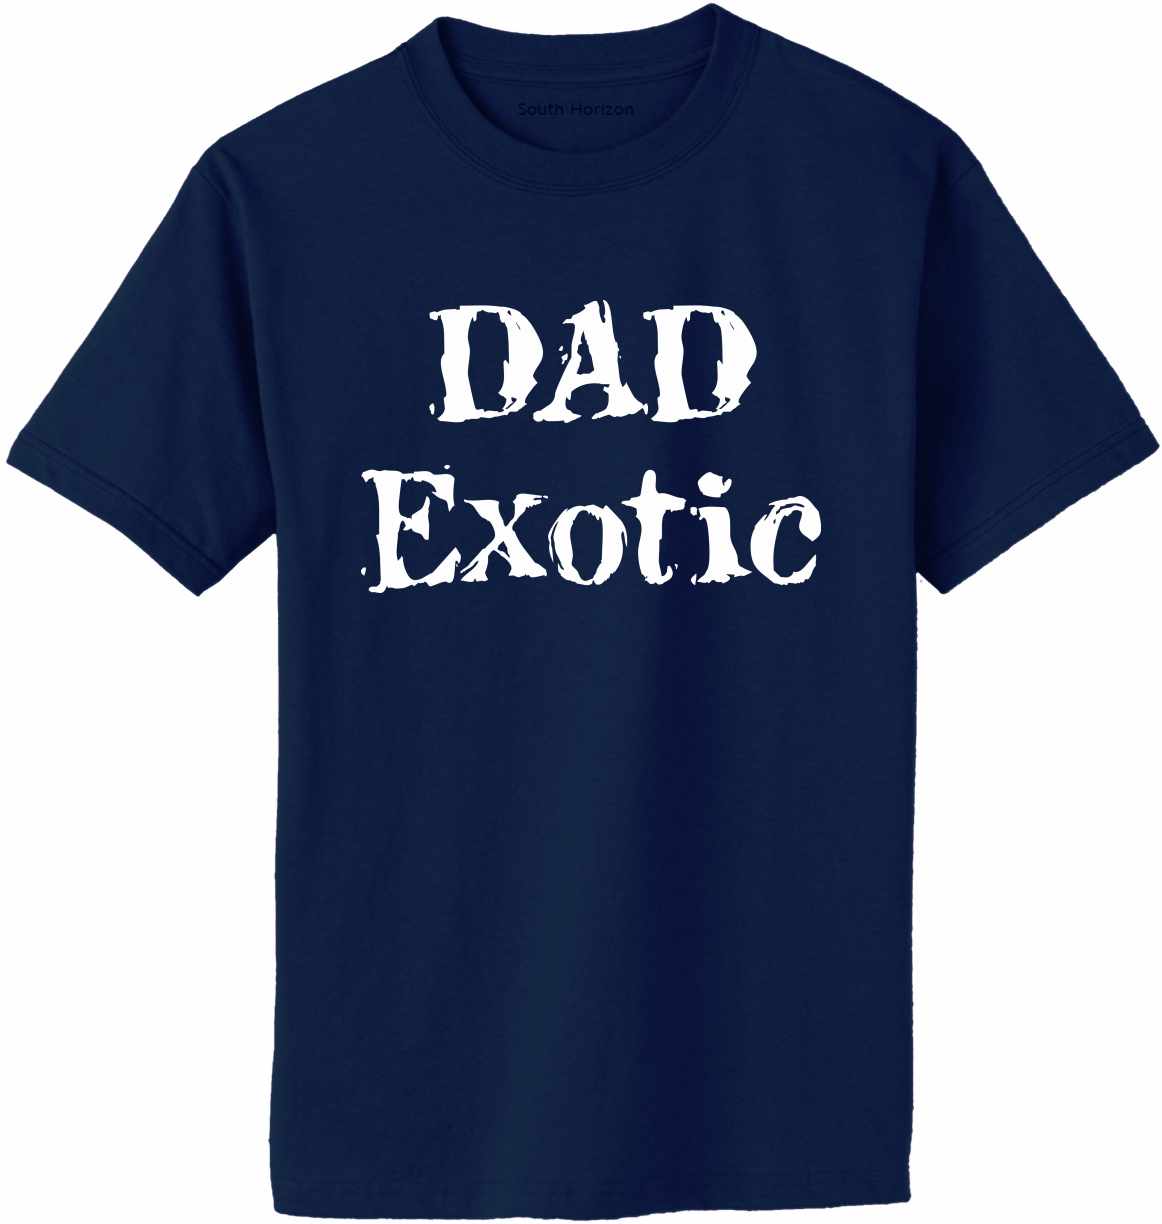 DAD EXOTIC funny Fathers Day Birthday Shirt Adult T-Shirt (#1117-1)